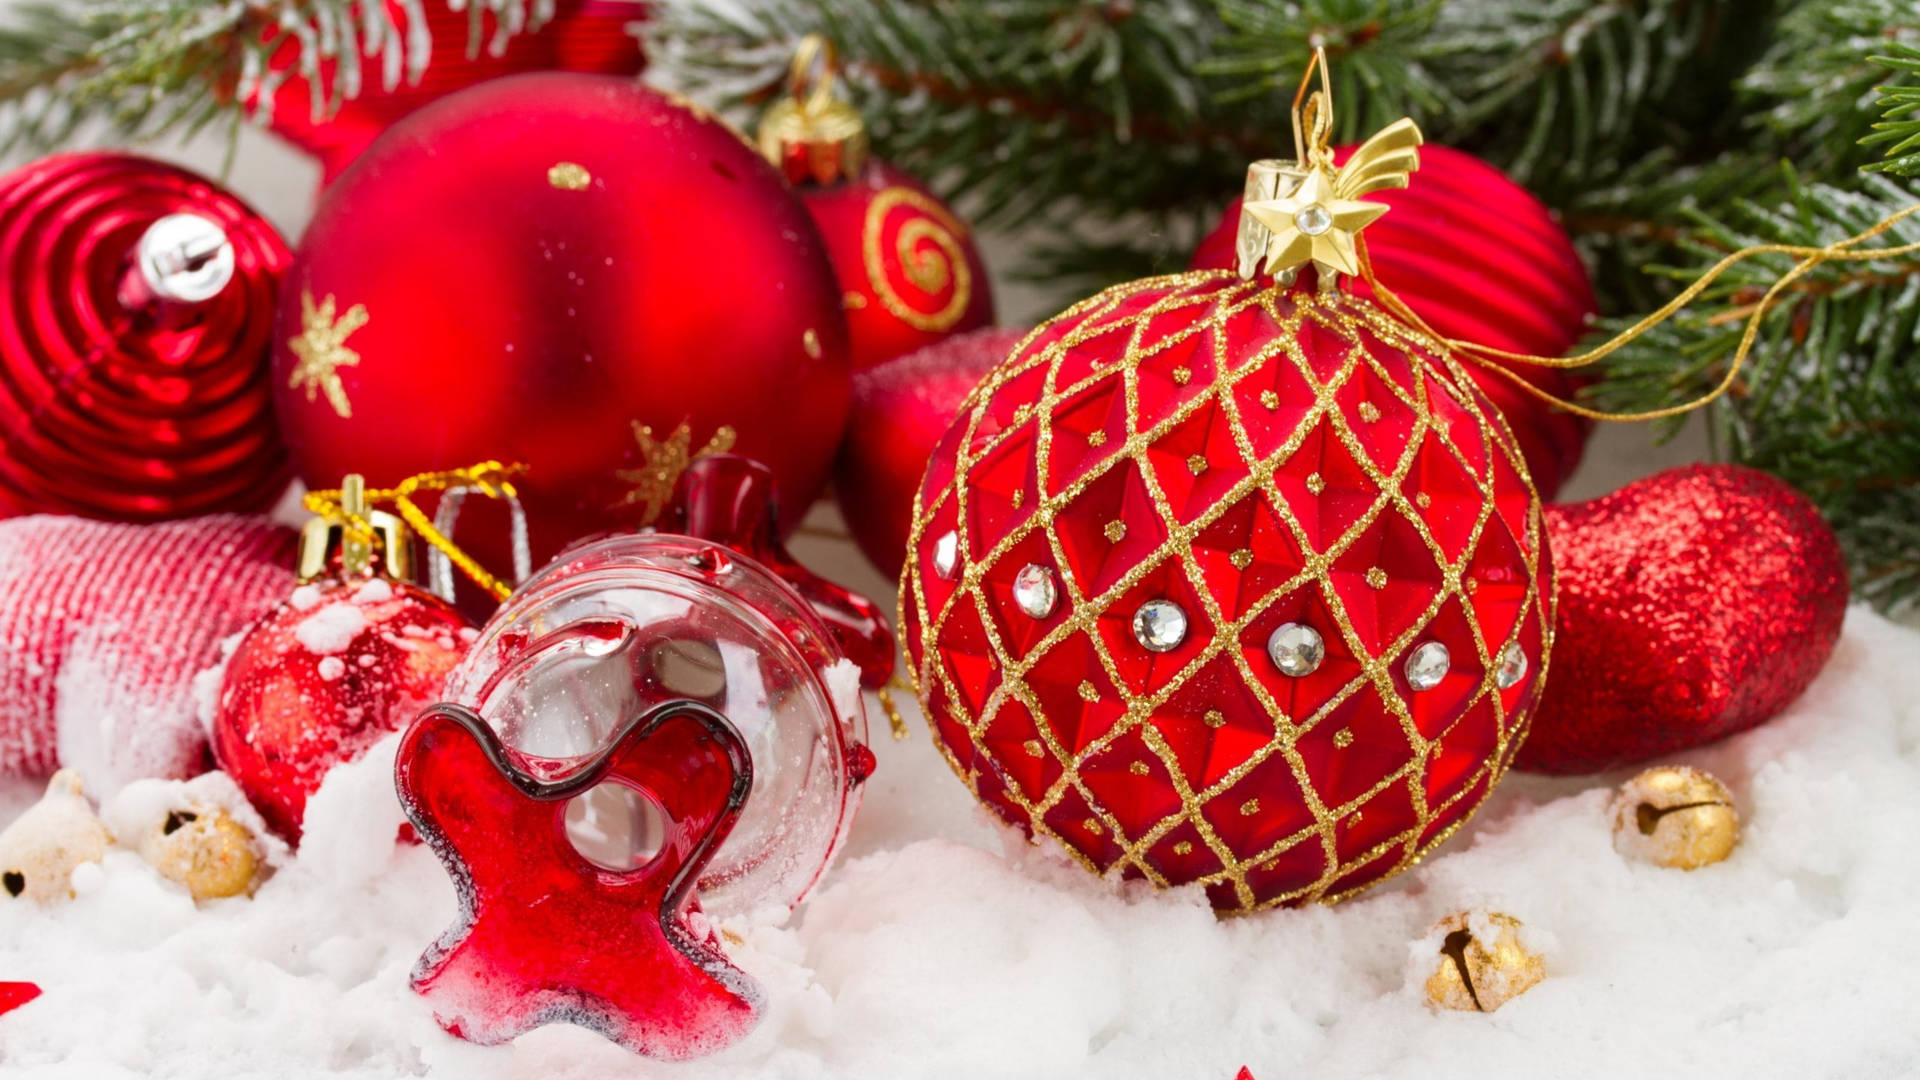 Red Aesthetic Christmas Balls In Snow Wallpaper